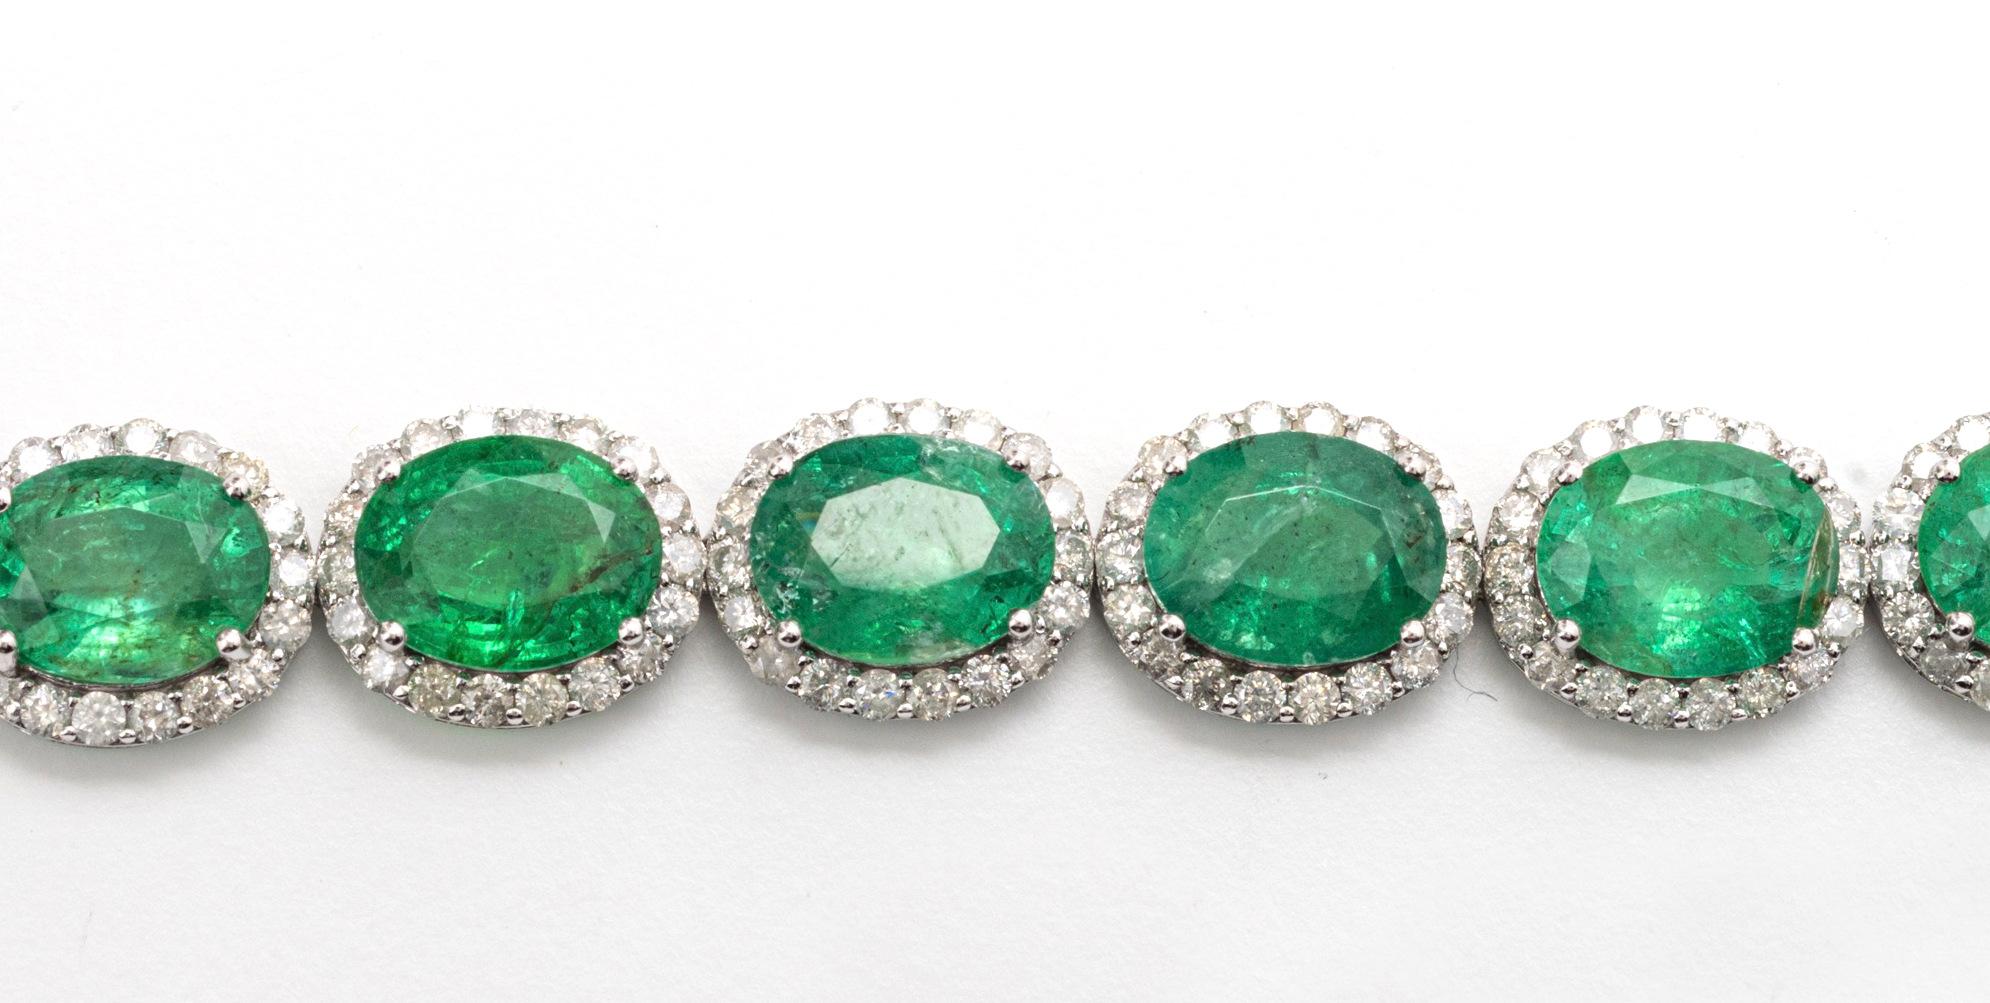 
Emerald and Diamond Bracelet
Set with sixteen oval shaped emeralds weighing approximately 22.93 carats, framed by round diamonds weighing approximately 4.15 carats, mounted in 14 kt gold, length 7 inches.